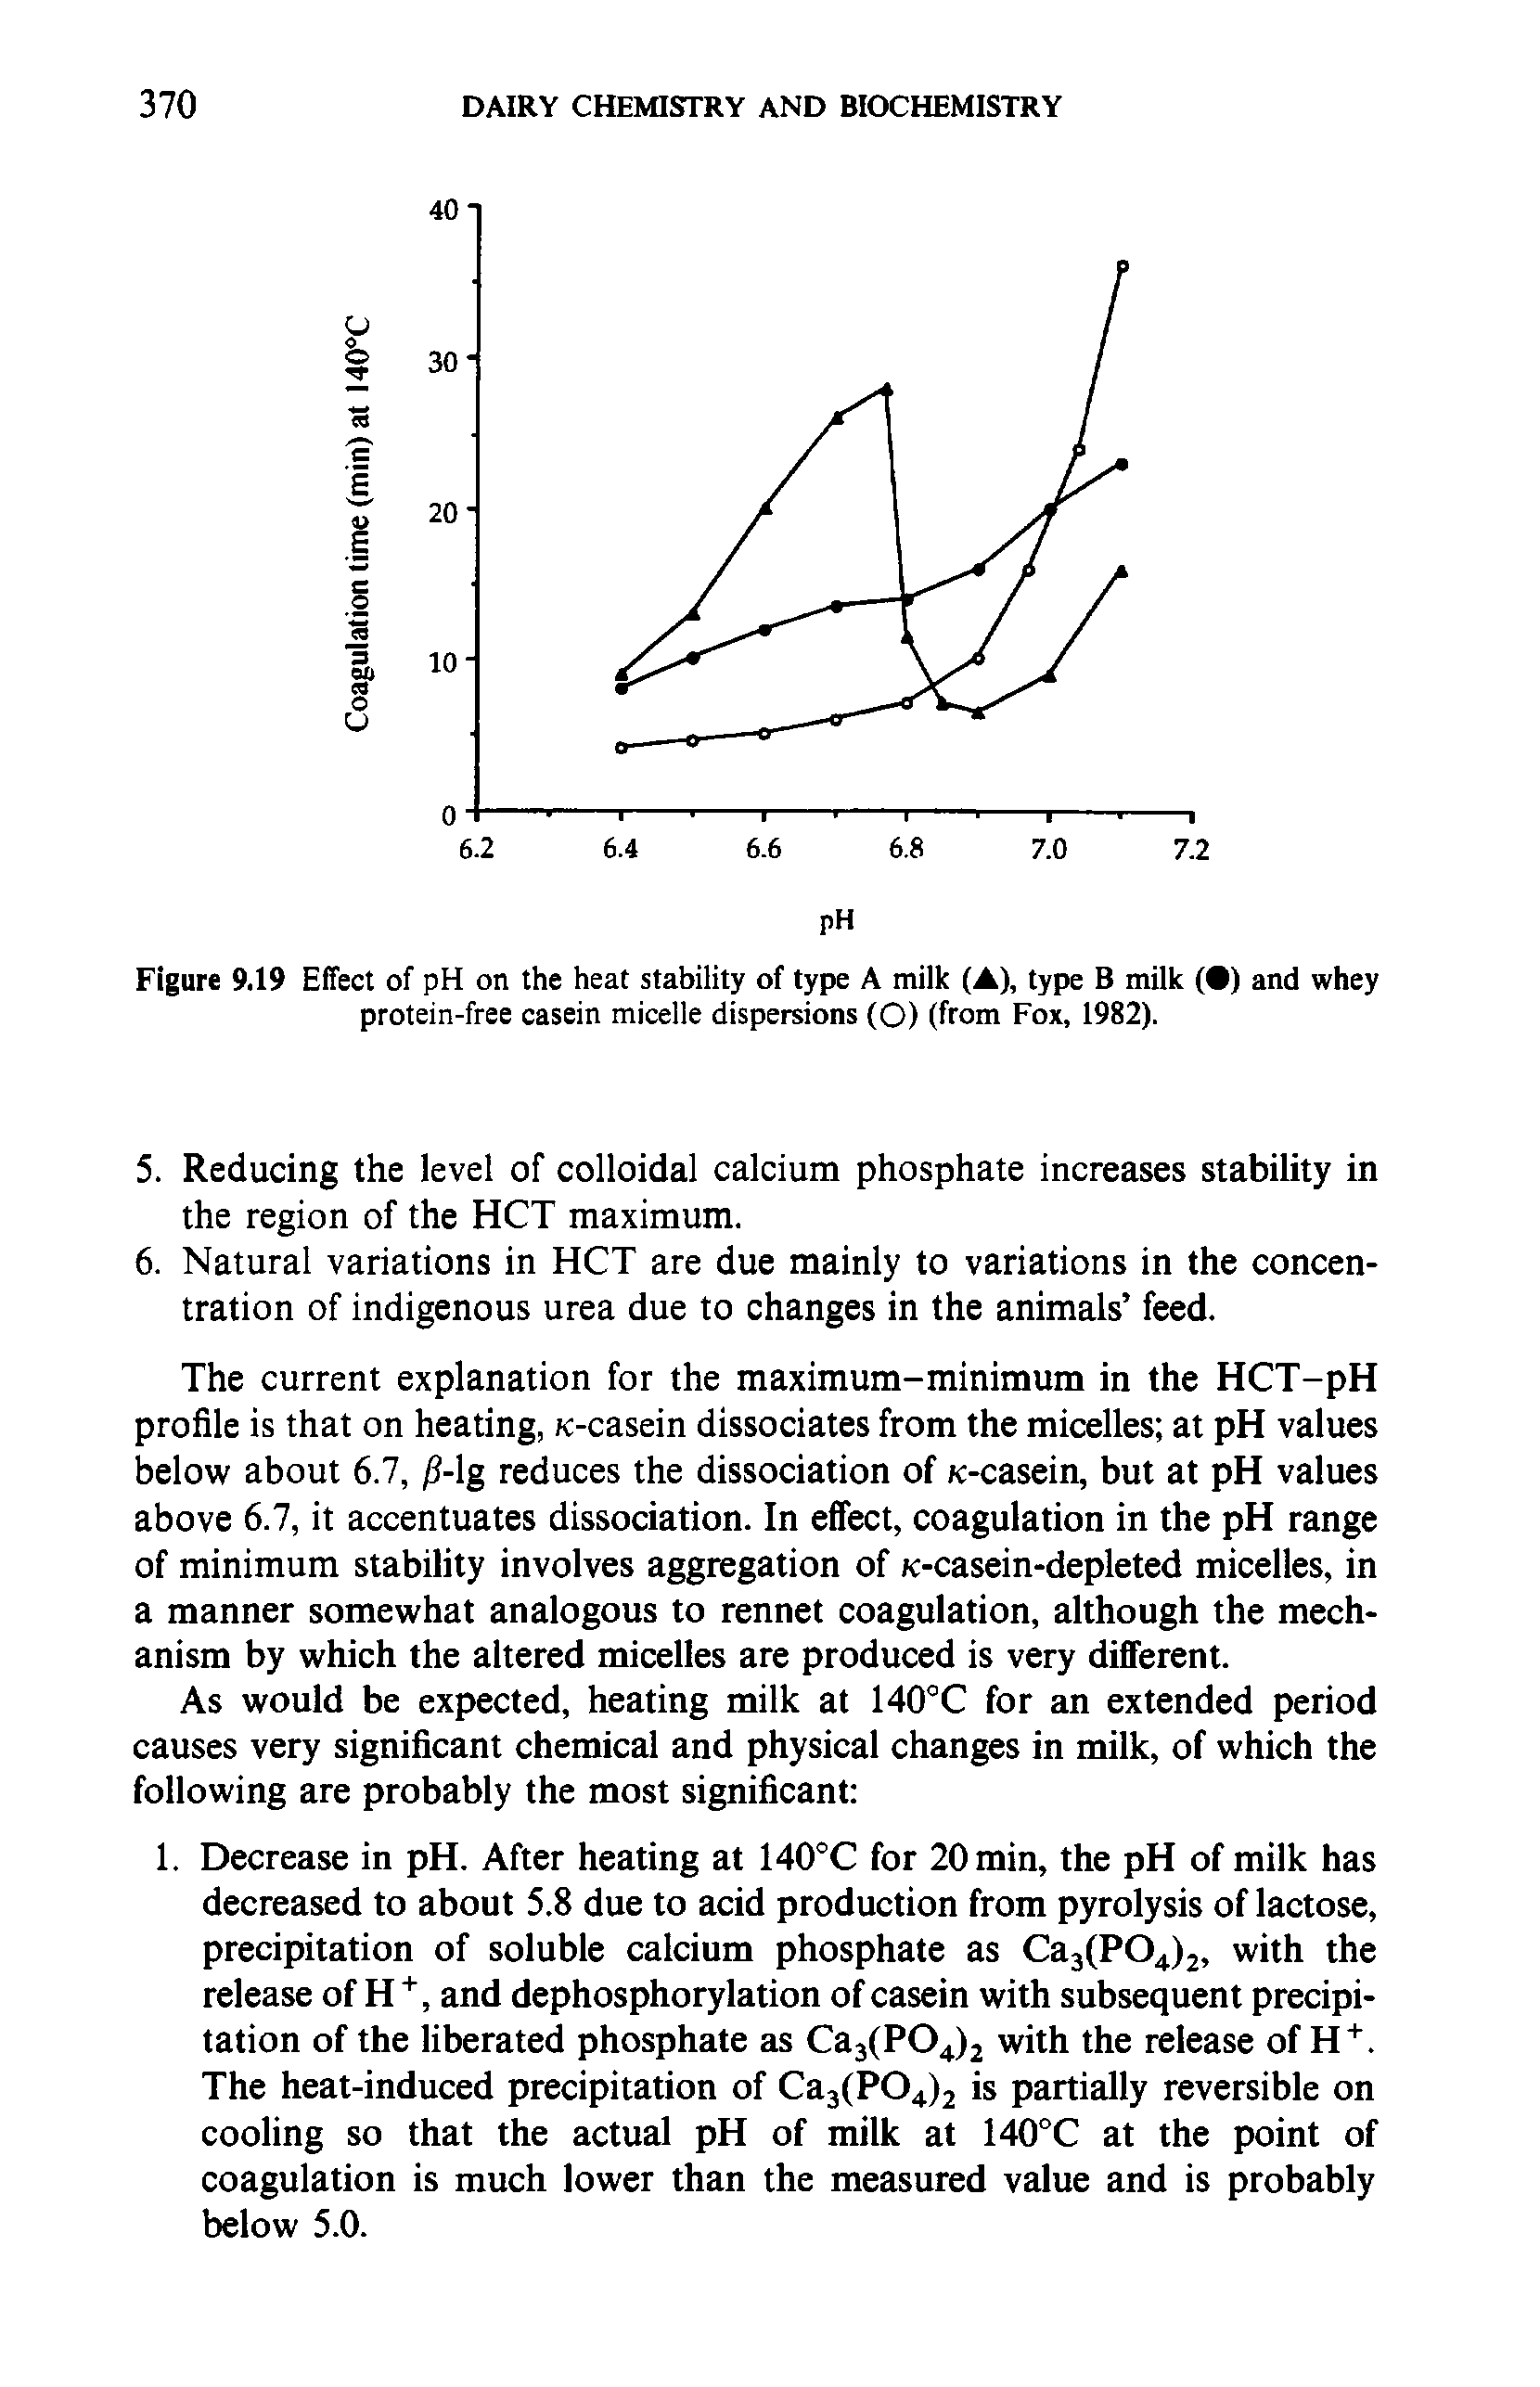 Figure 9.19 Effect of pH on the heat stability of type A milk (A), type B milk ( ) and whey protein-free casein micelle dispersions (O) (from Fox, 1982).